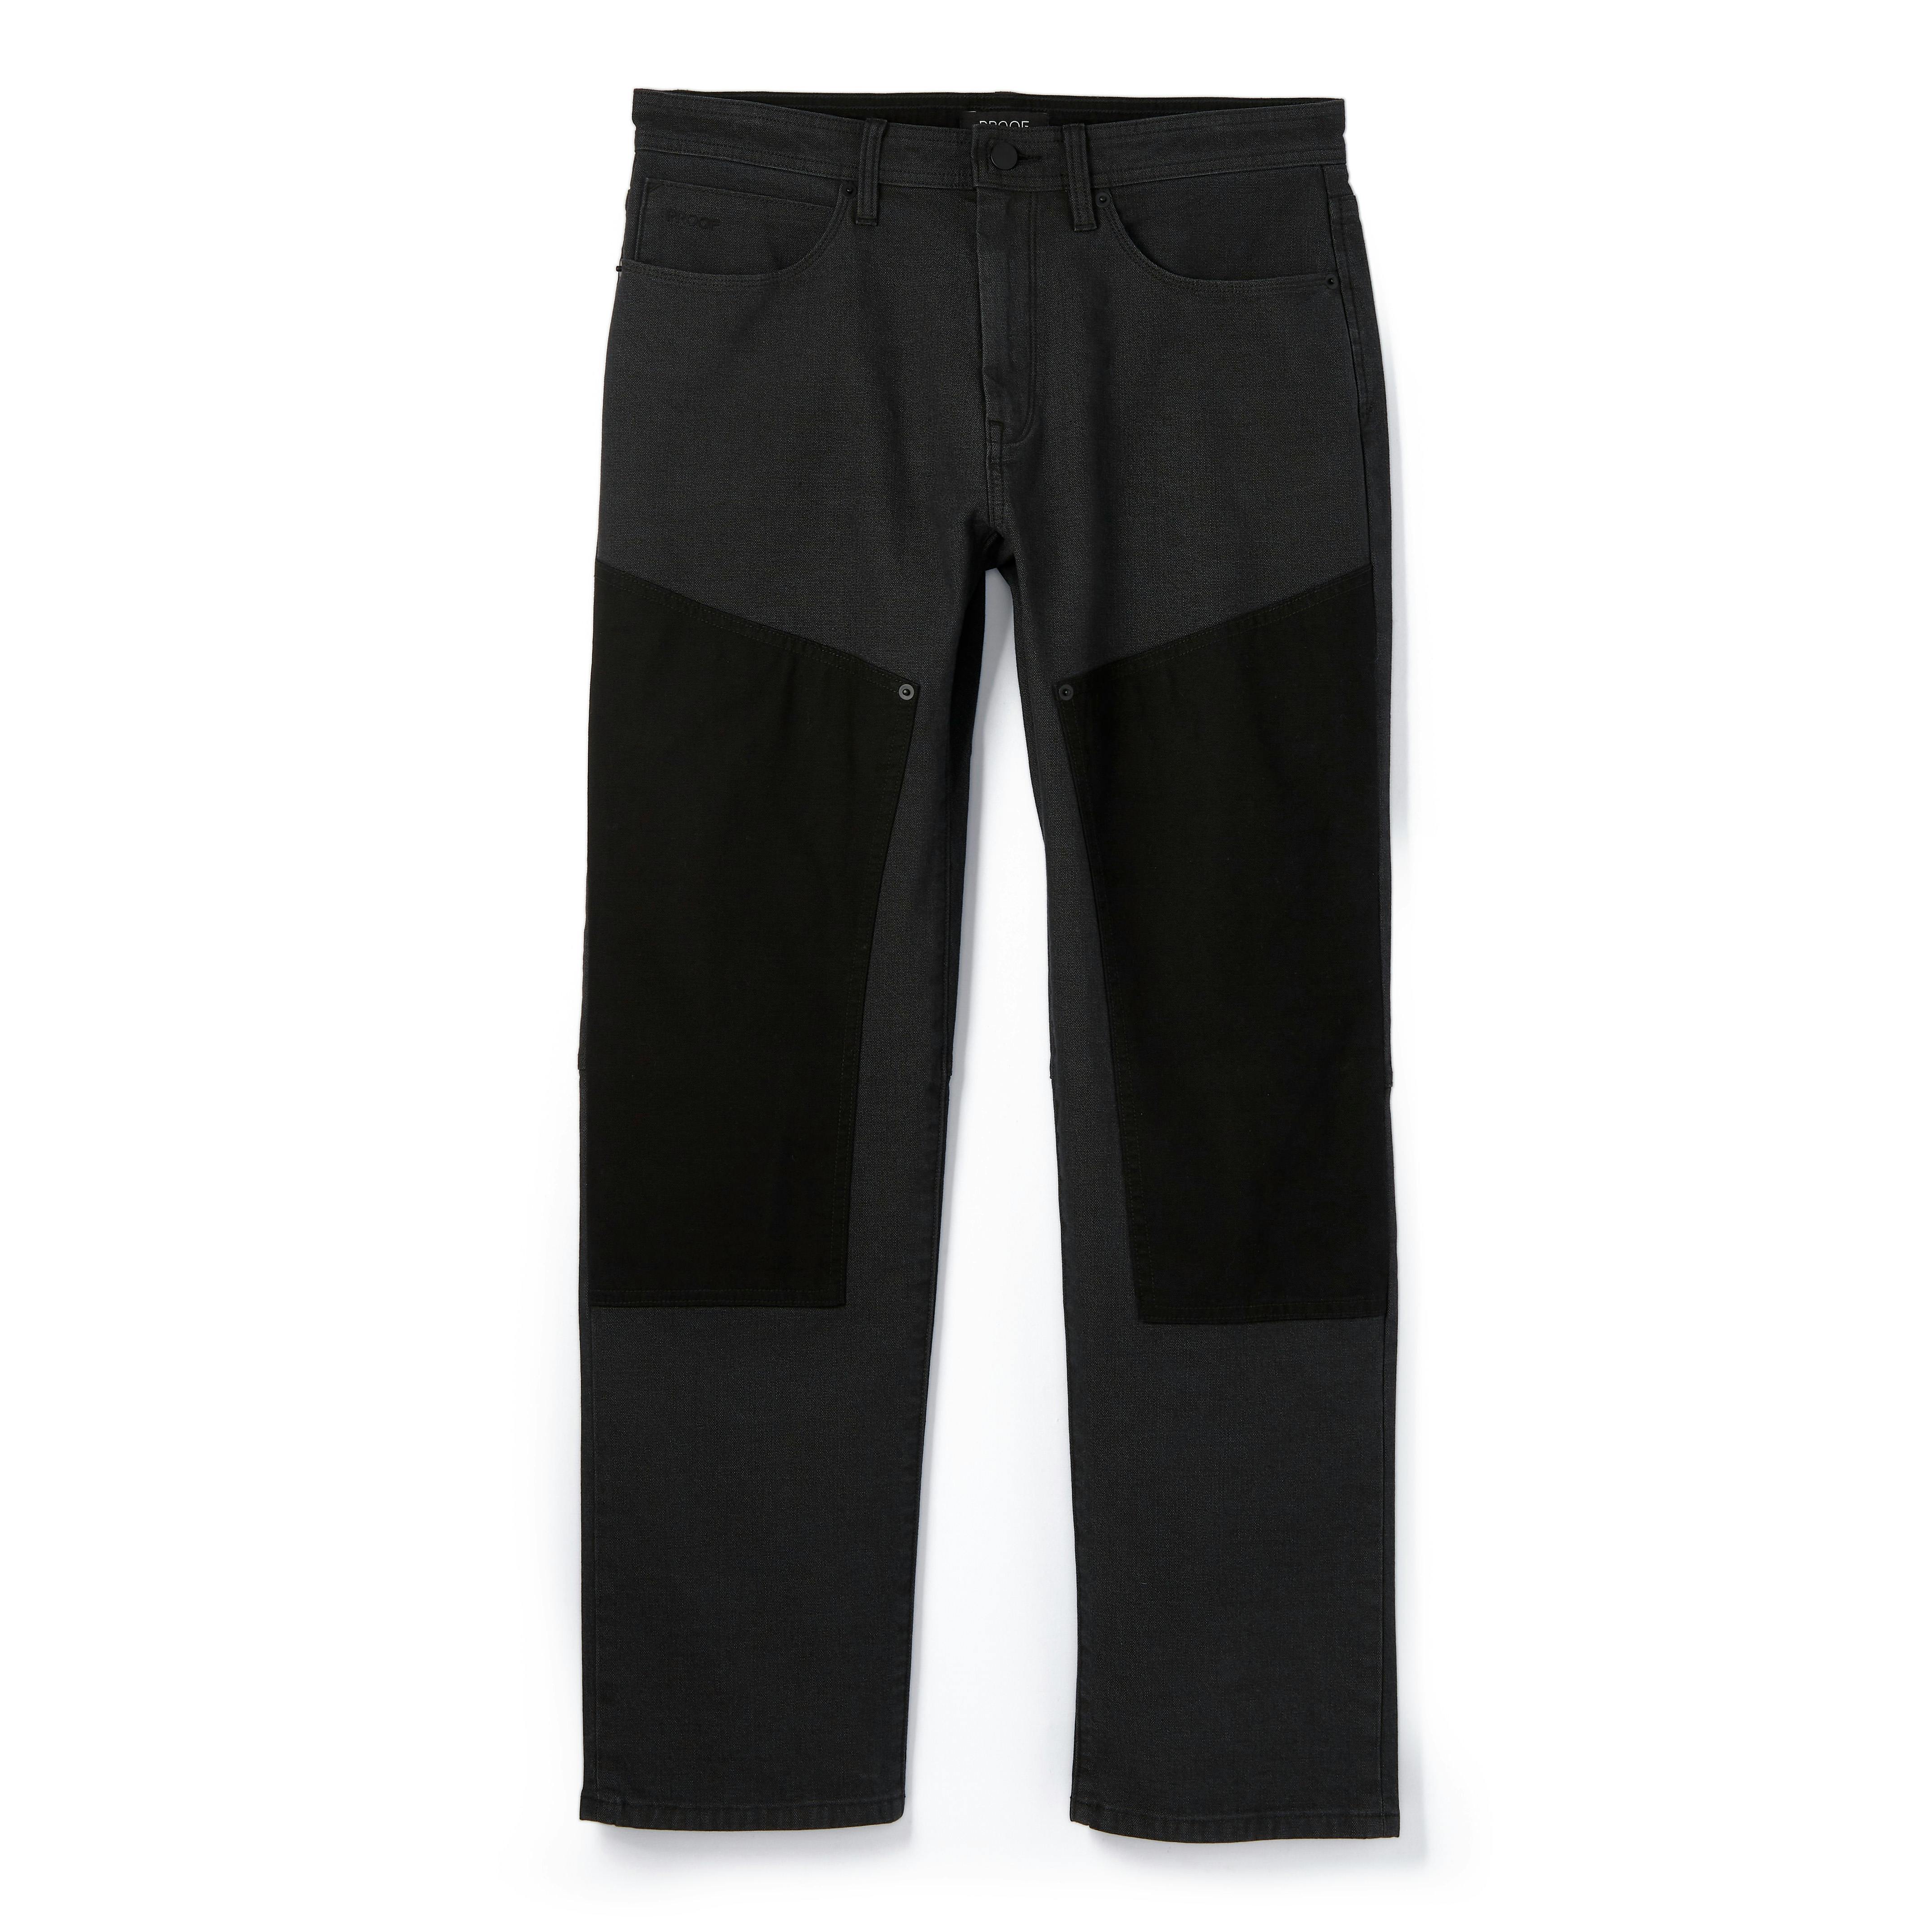 Rover Double Knee Work Pant - Straight